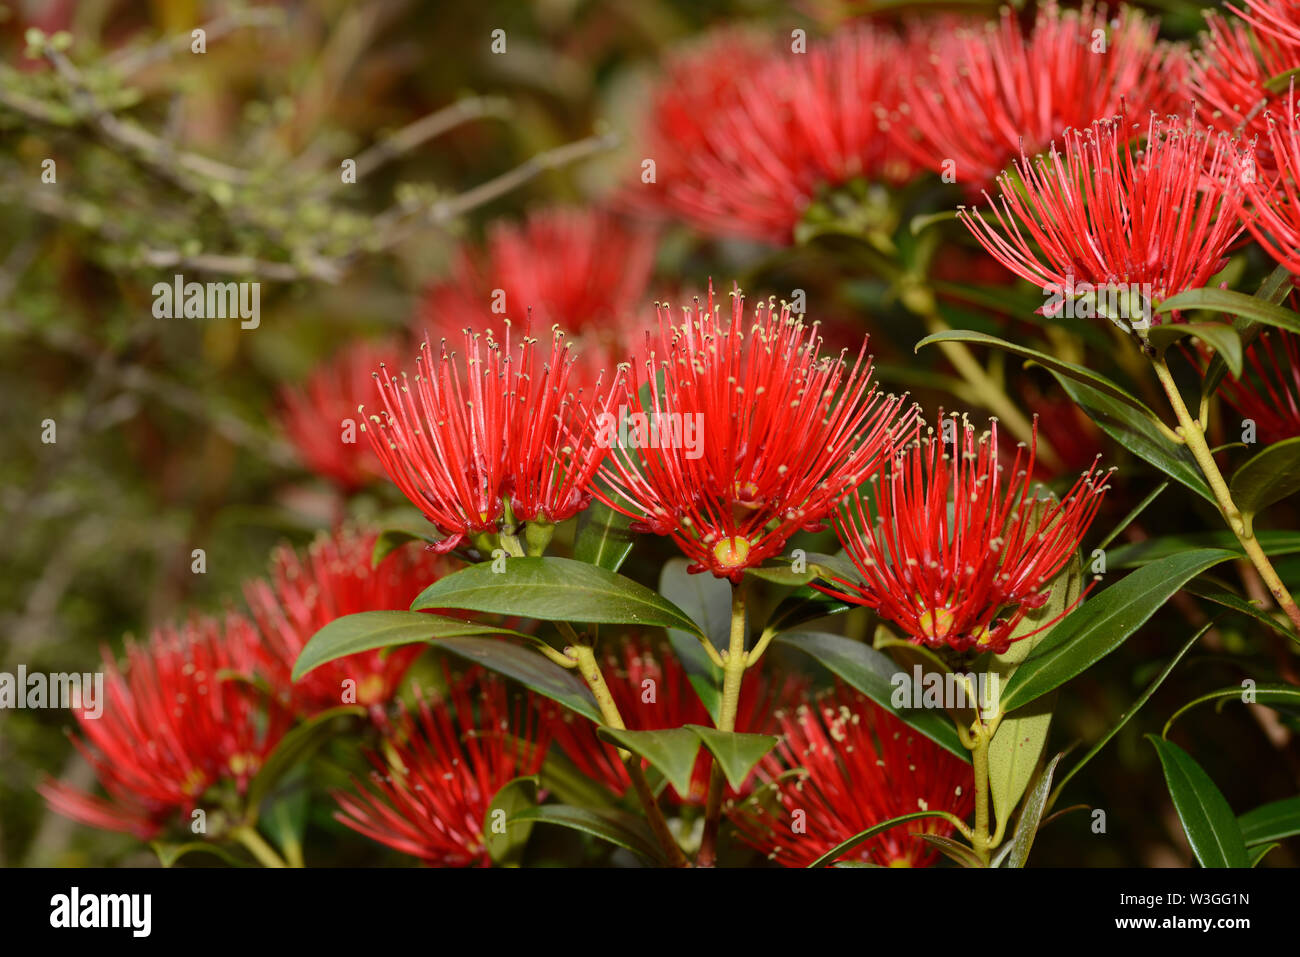 Flowers of New Zealand Southern Rata brighten the day for visitors to the Otira Gorge in Arthurs Pass National Park, New Zealand. Stock Photo